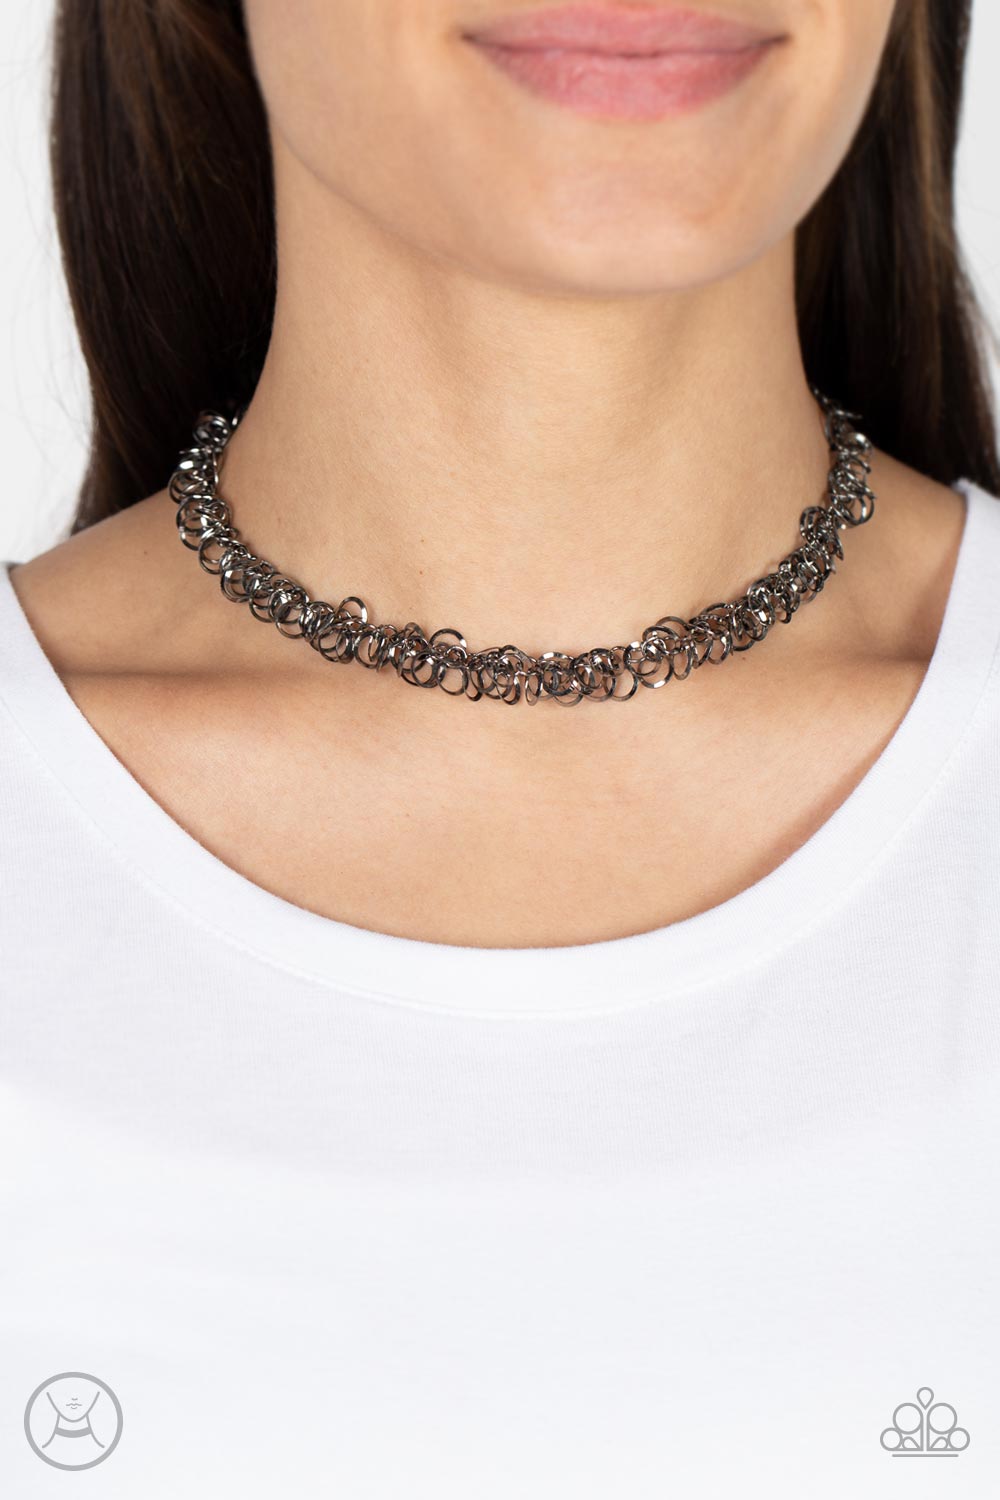 Cause a Commotion Black Choker Necklace